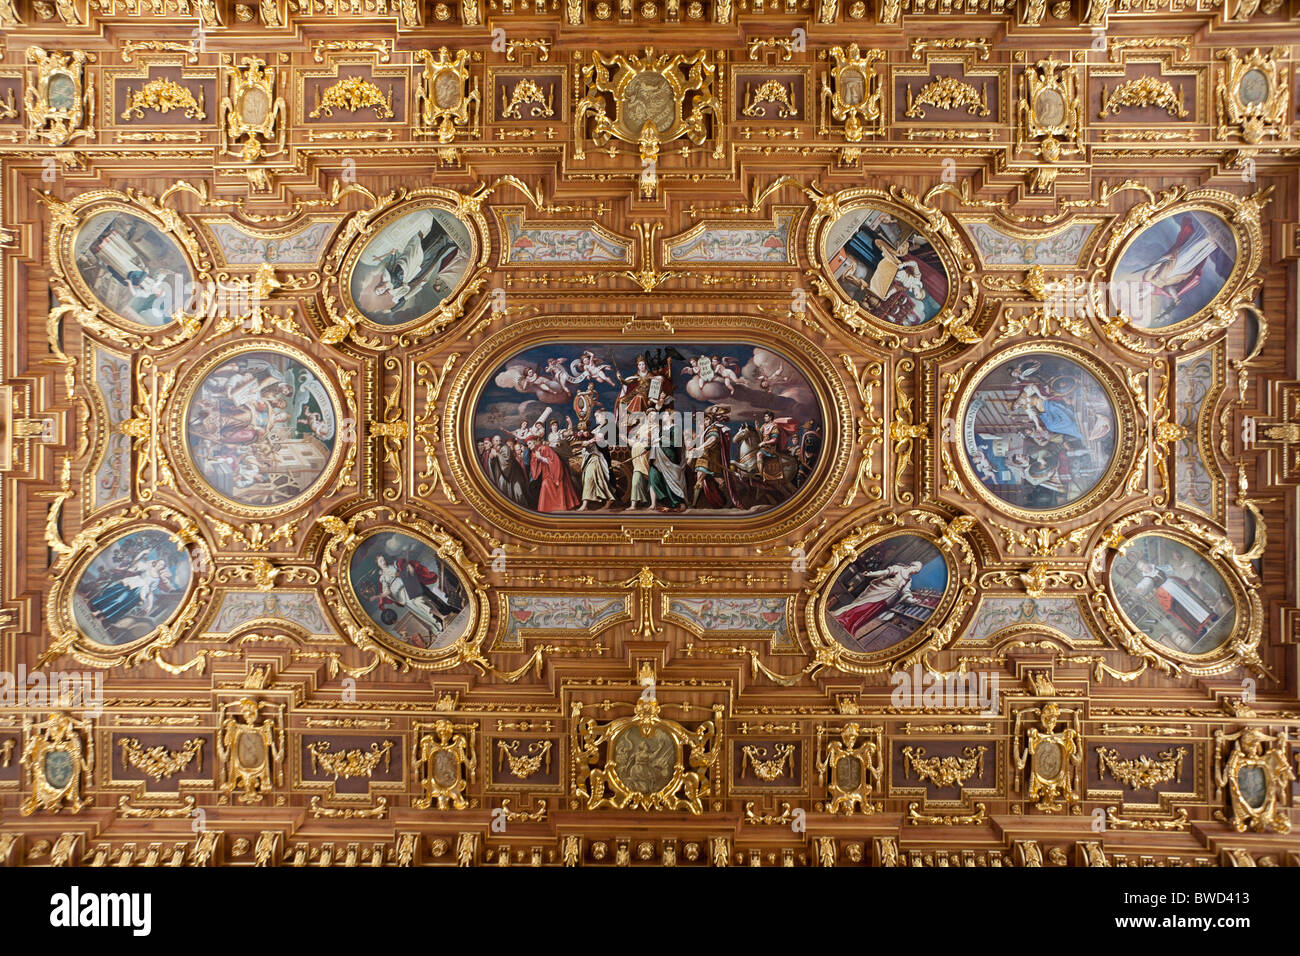 COVERED CEILING, GOLDENER SAAL, TOWN HALL, AUGSBURG, BAVARIA, GERMANY Stock Photo